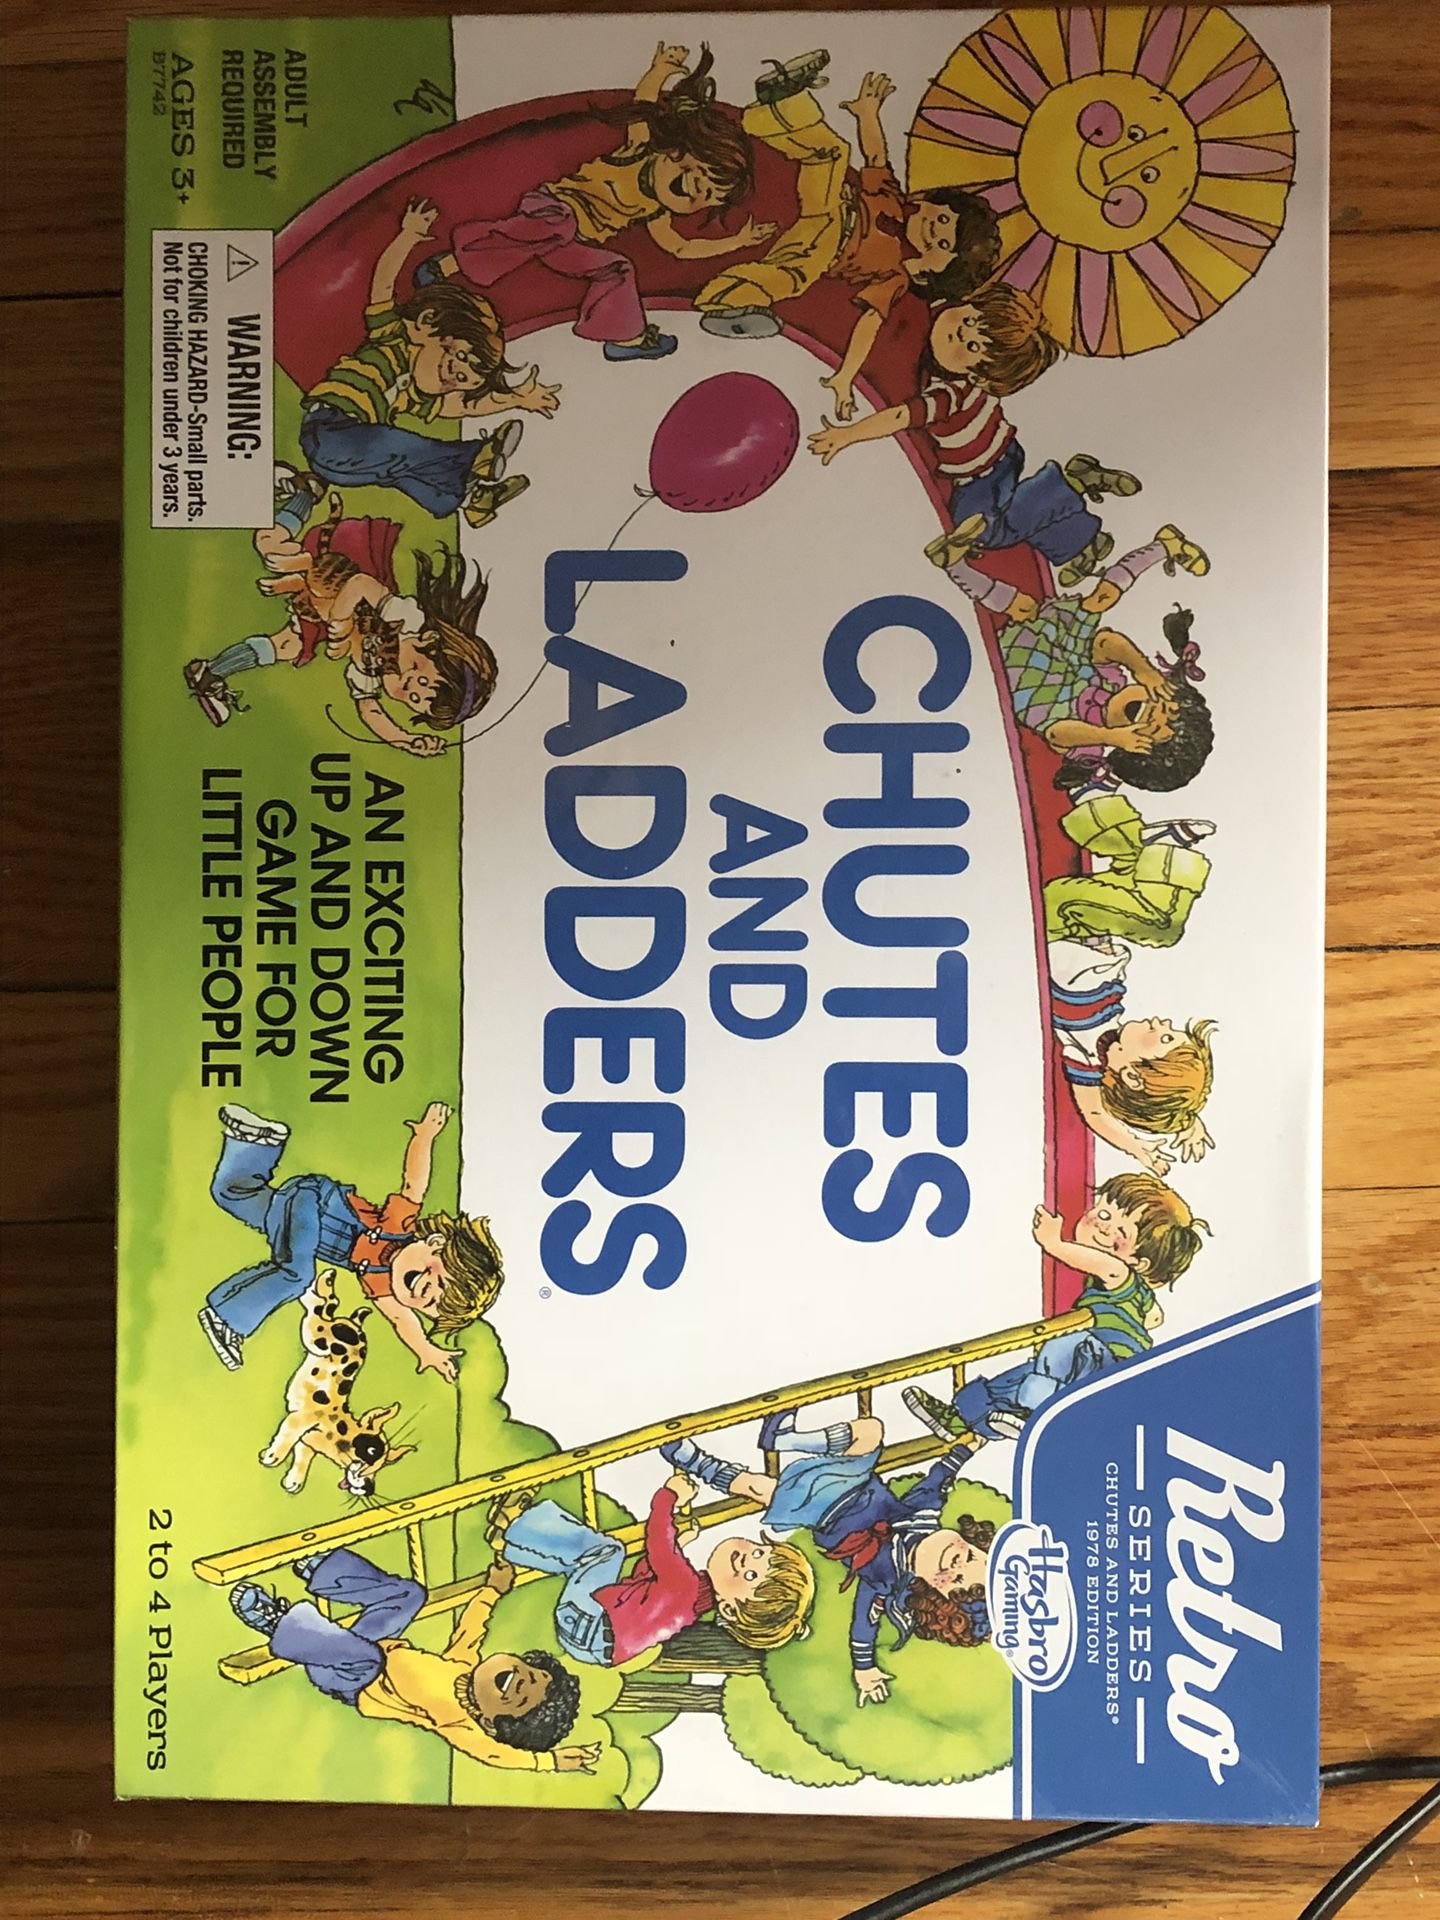 Chutes and ladders game for kids